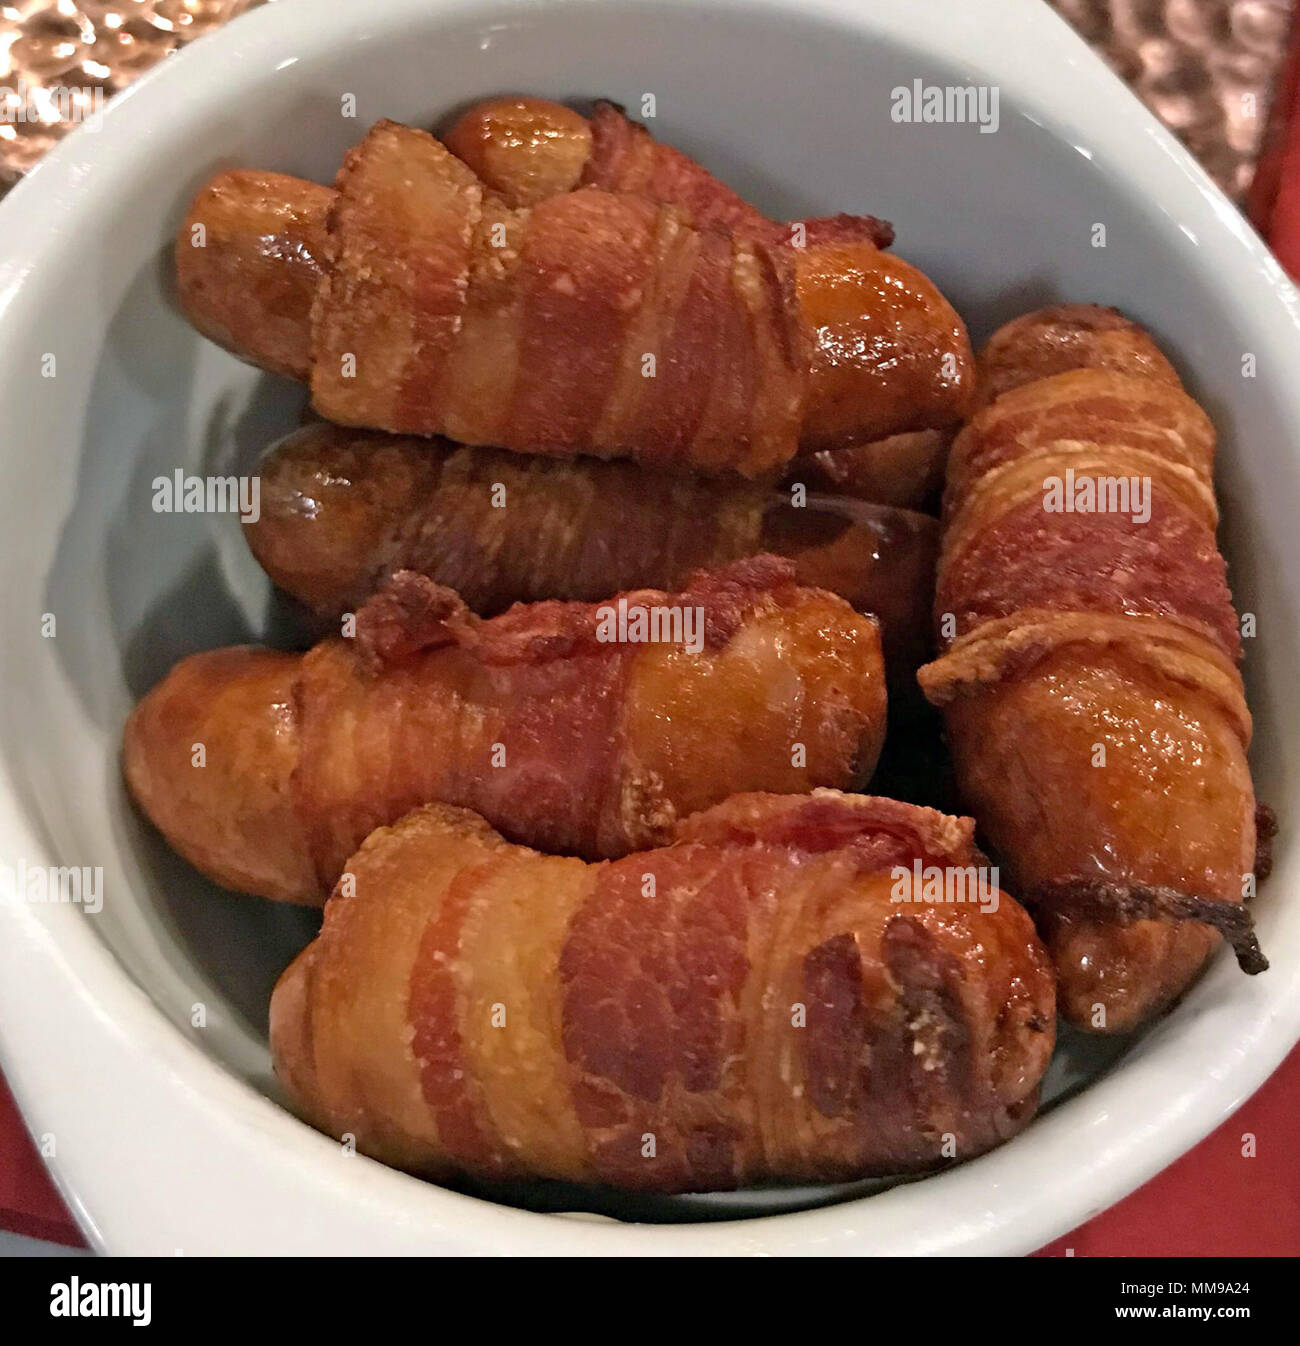 Pigs In Blankets, sausages in Bacon, Pork food product, Pub snack Stock Photo